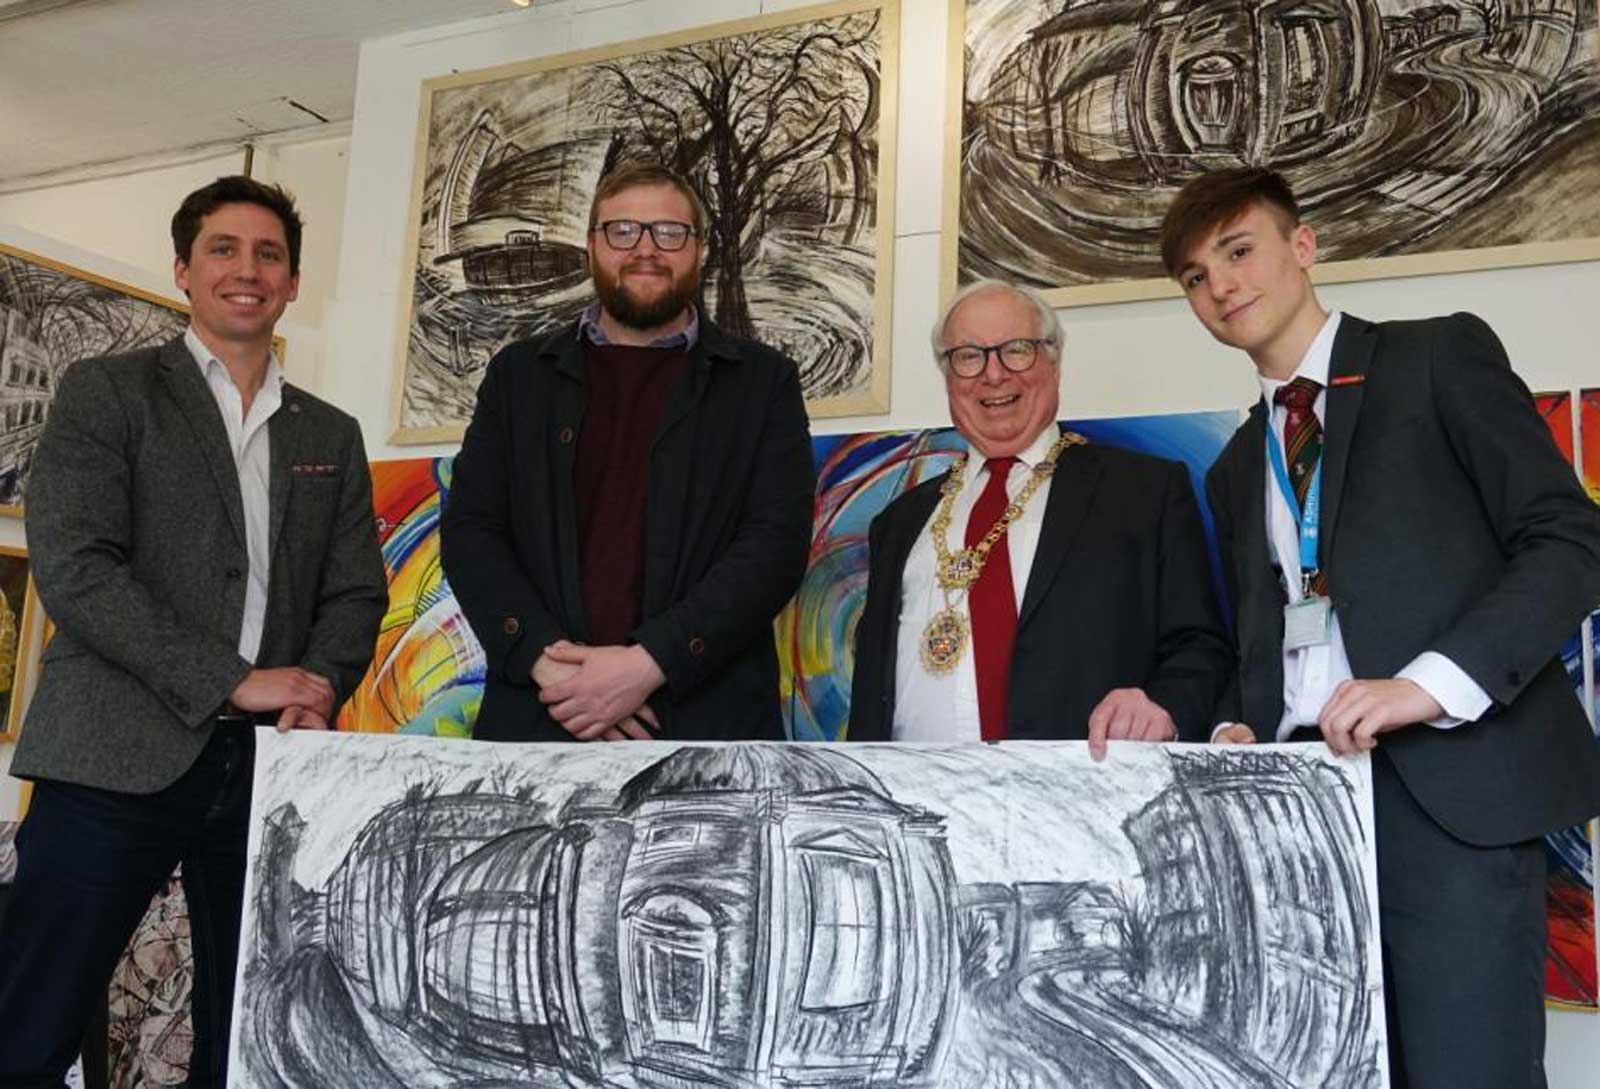 Ashville A-level art student Oli Butterworth and his highly-commended work with (from left) judges David Morland, Andrew Mortimer and Coun Nick Wood